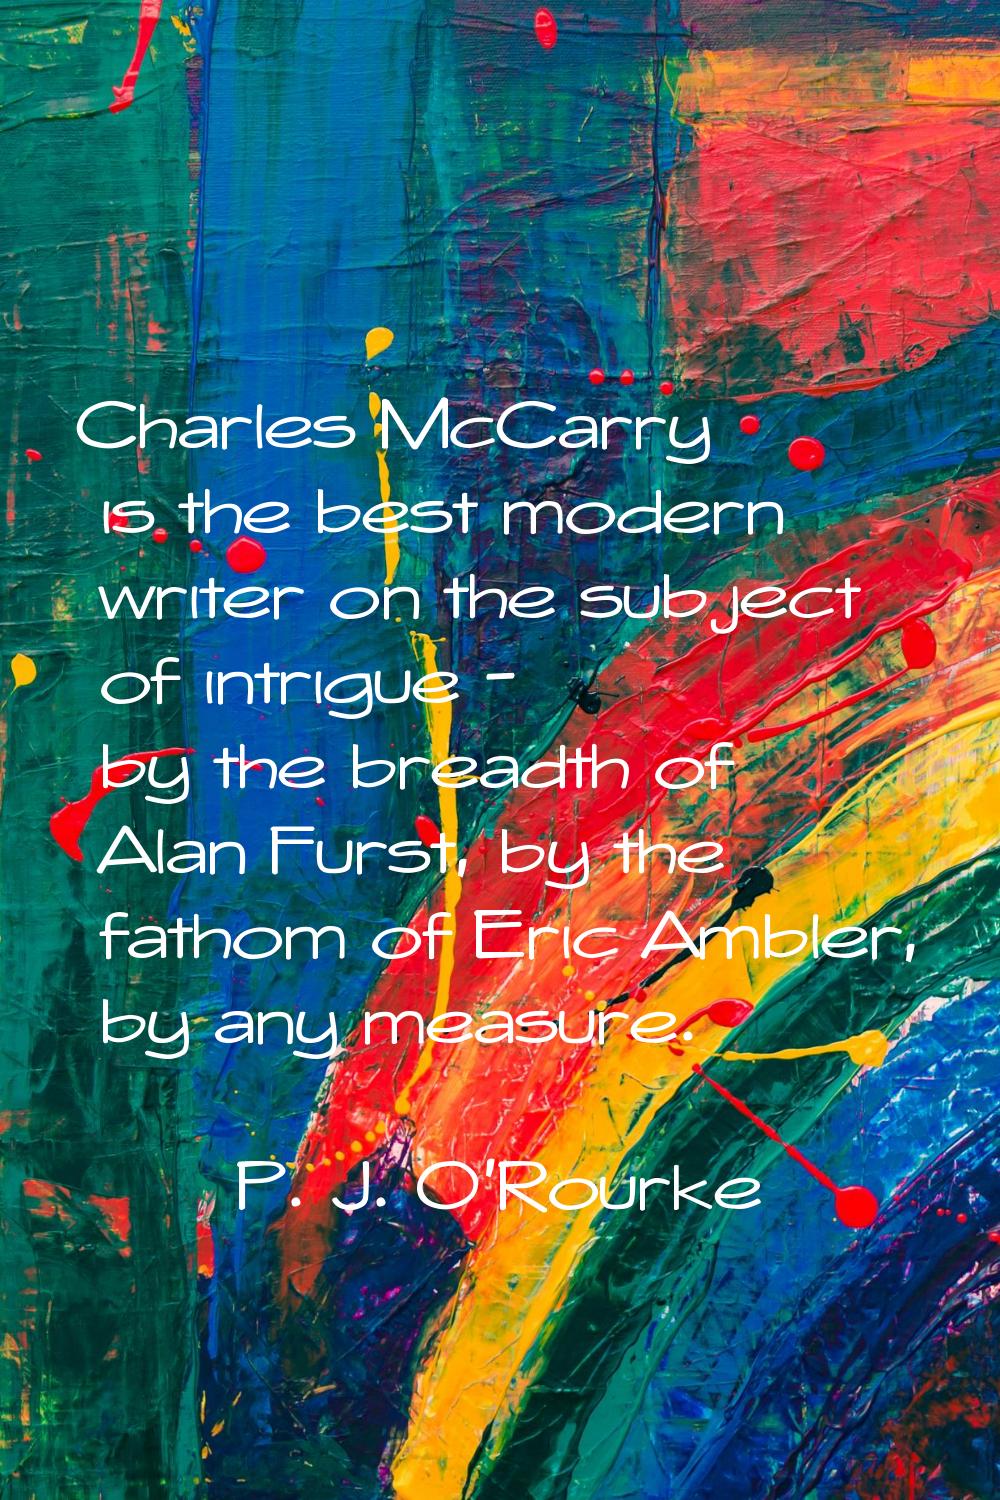 Charles McCarry is the best modern writer on the subject of intrigue - by the breadth of Alan Furst